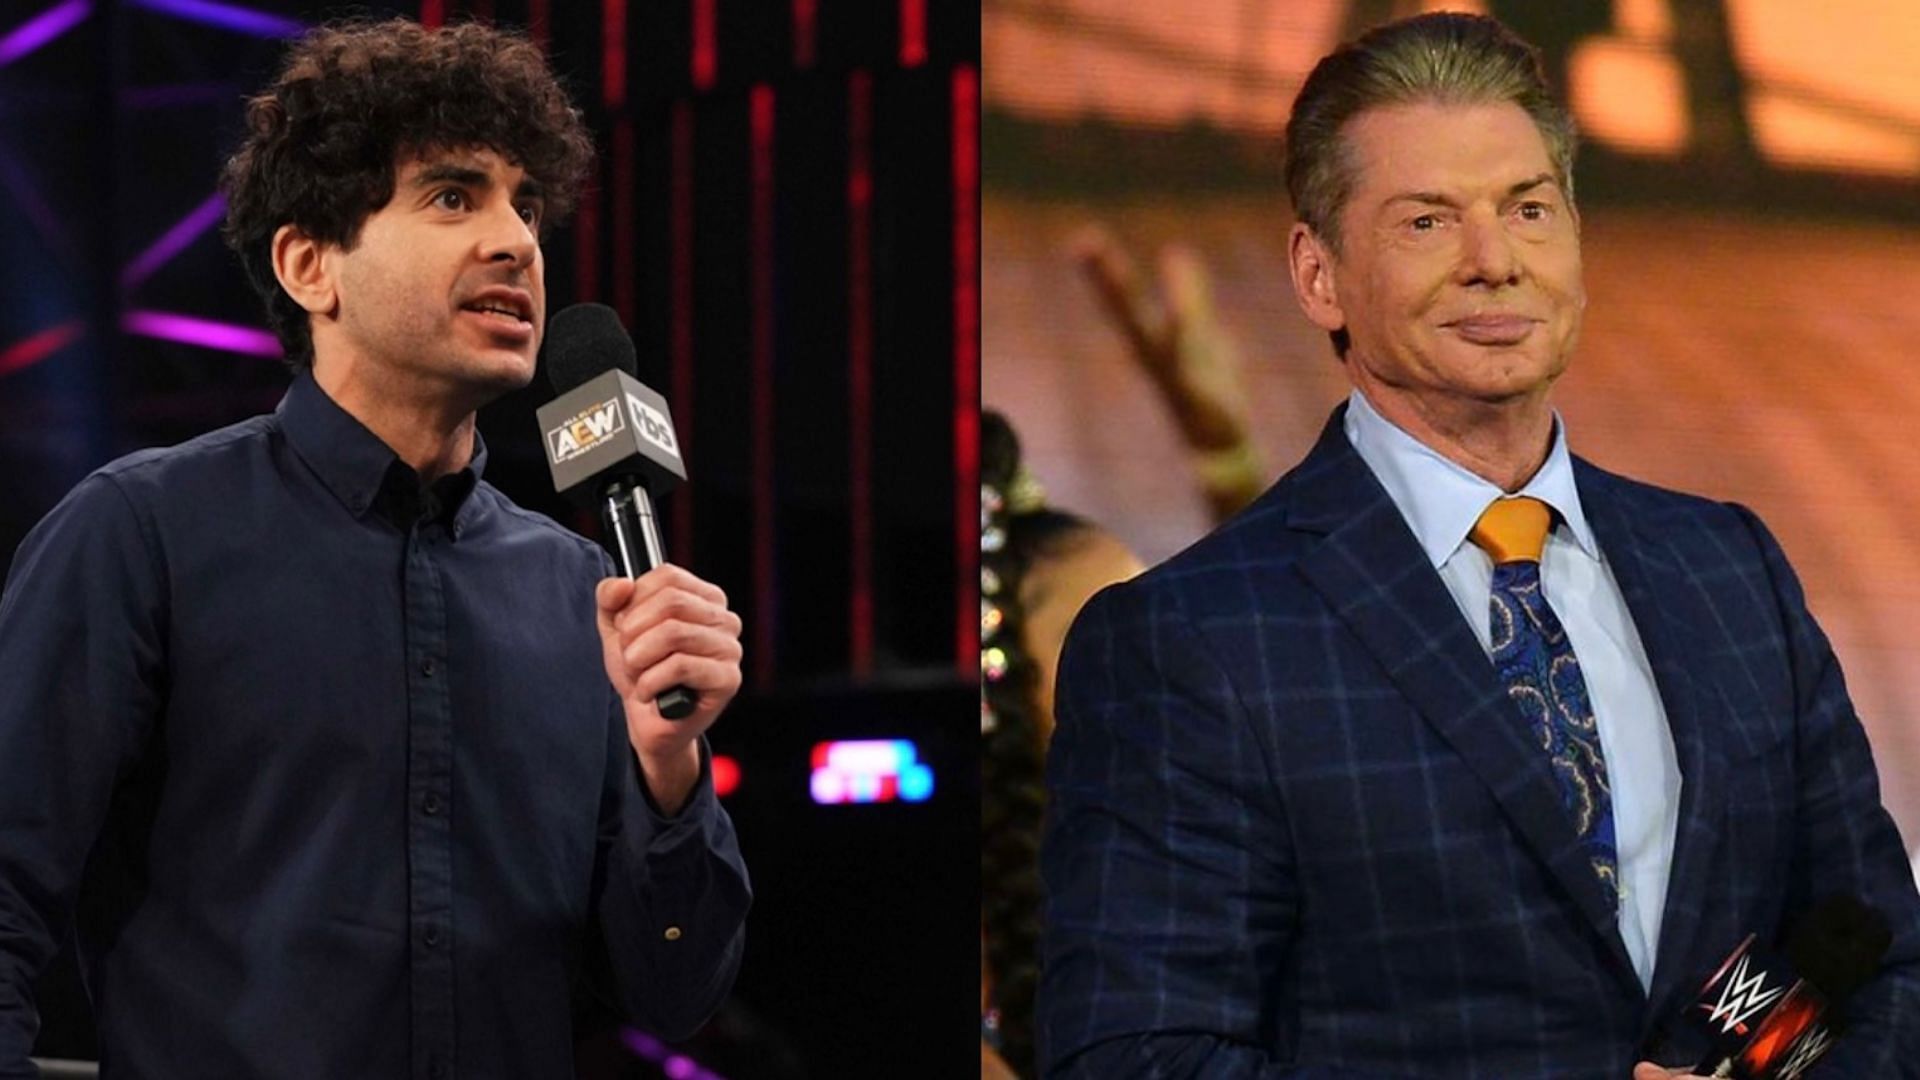 AEW CEO Tony Khan commented on Vince McMahon